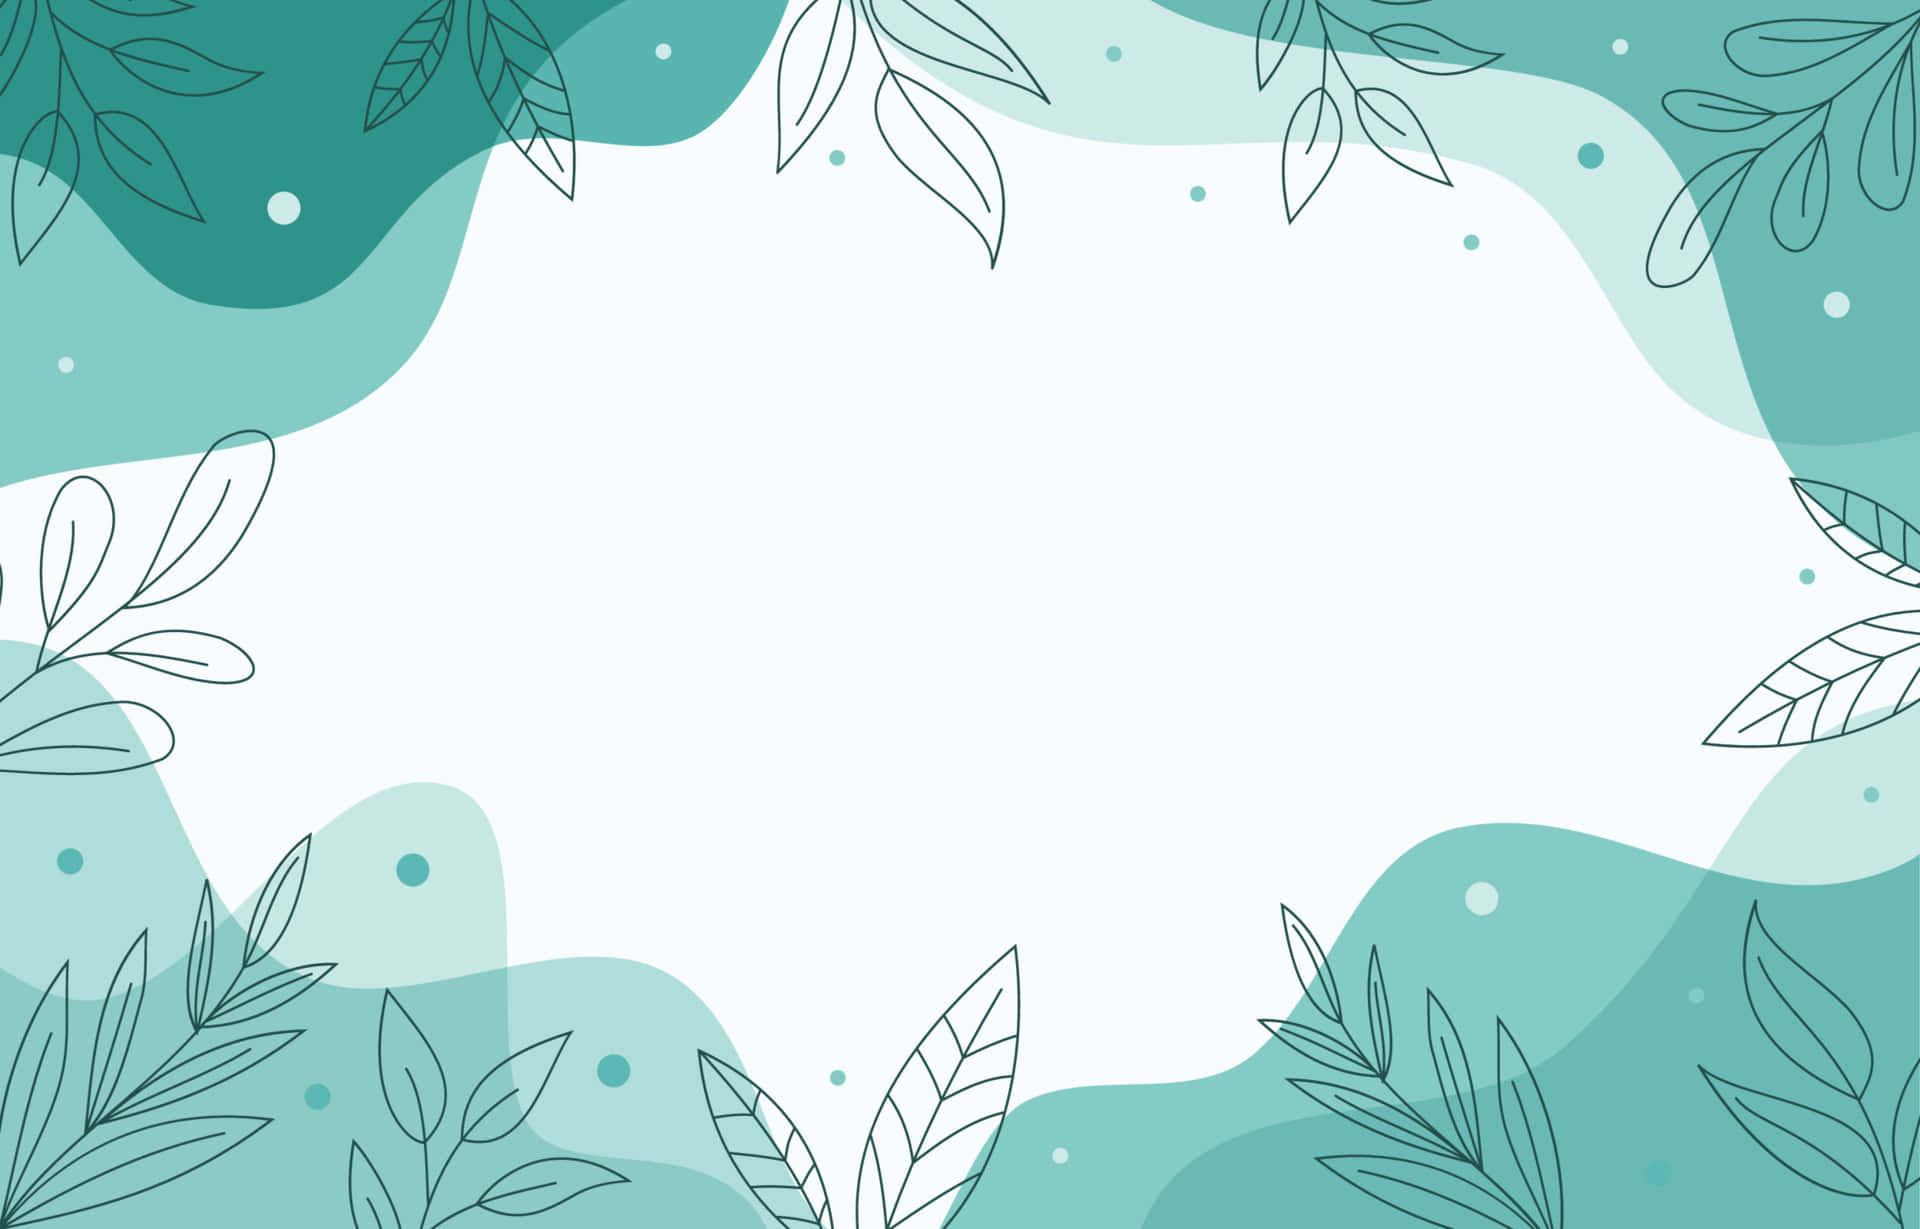 A refreshing mint green background